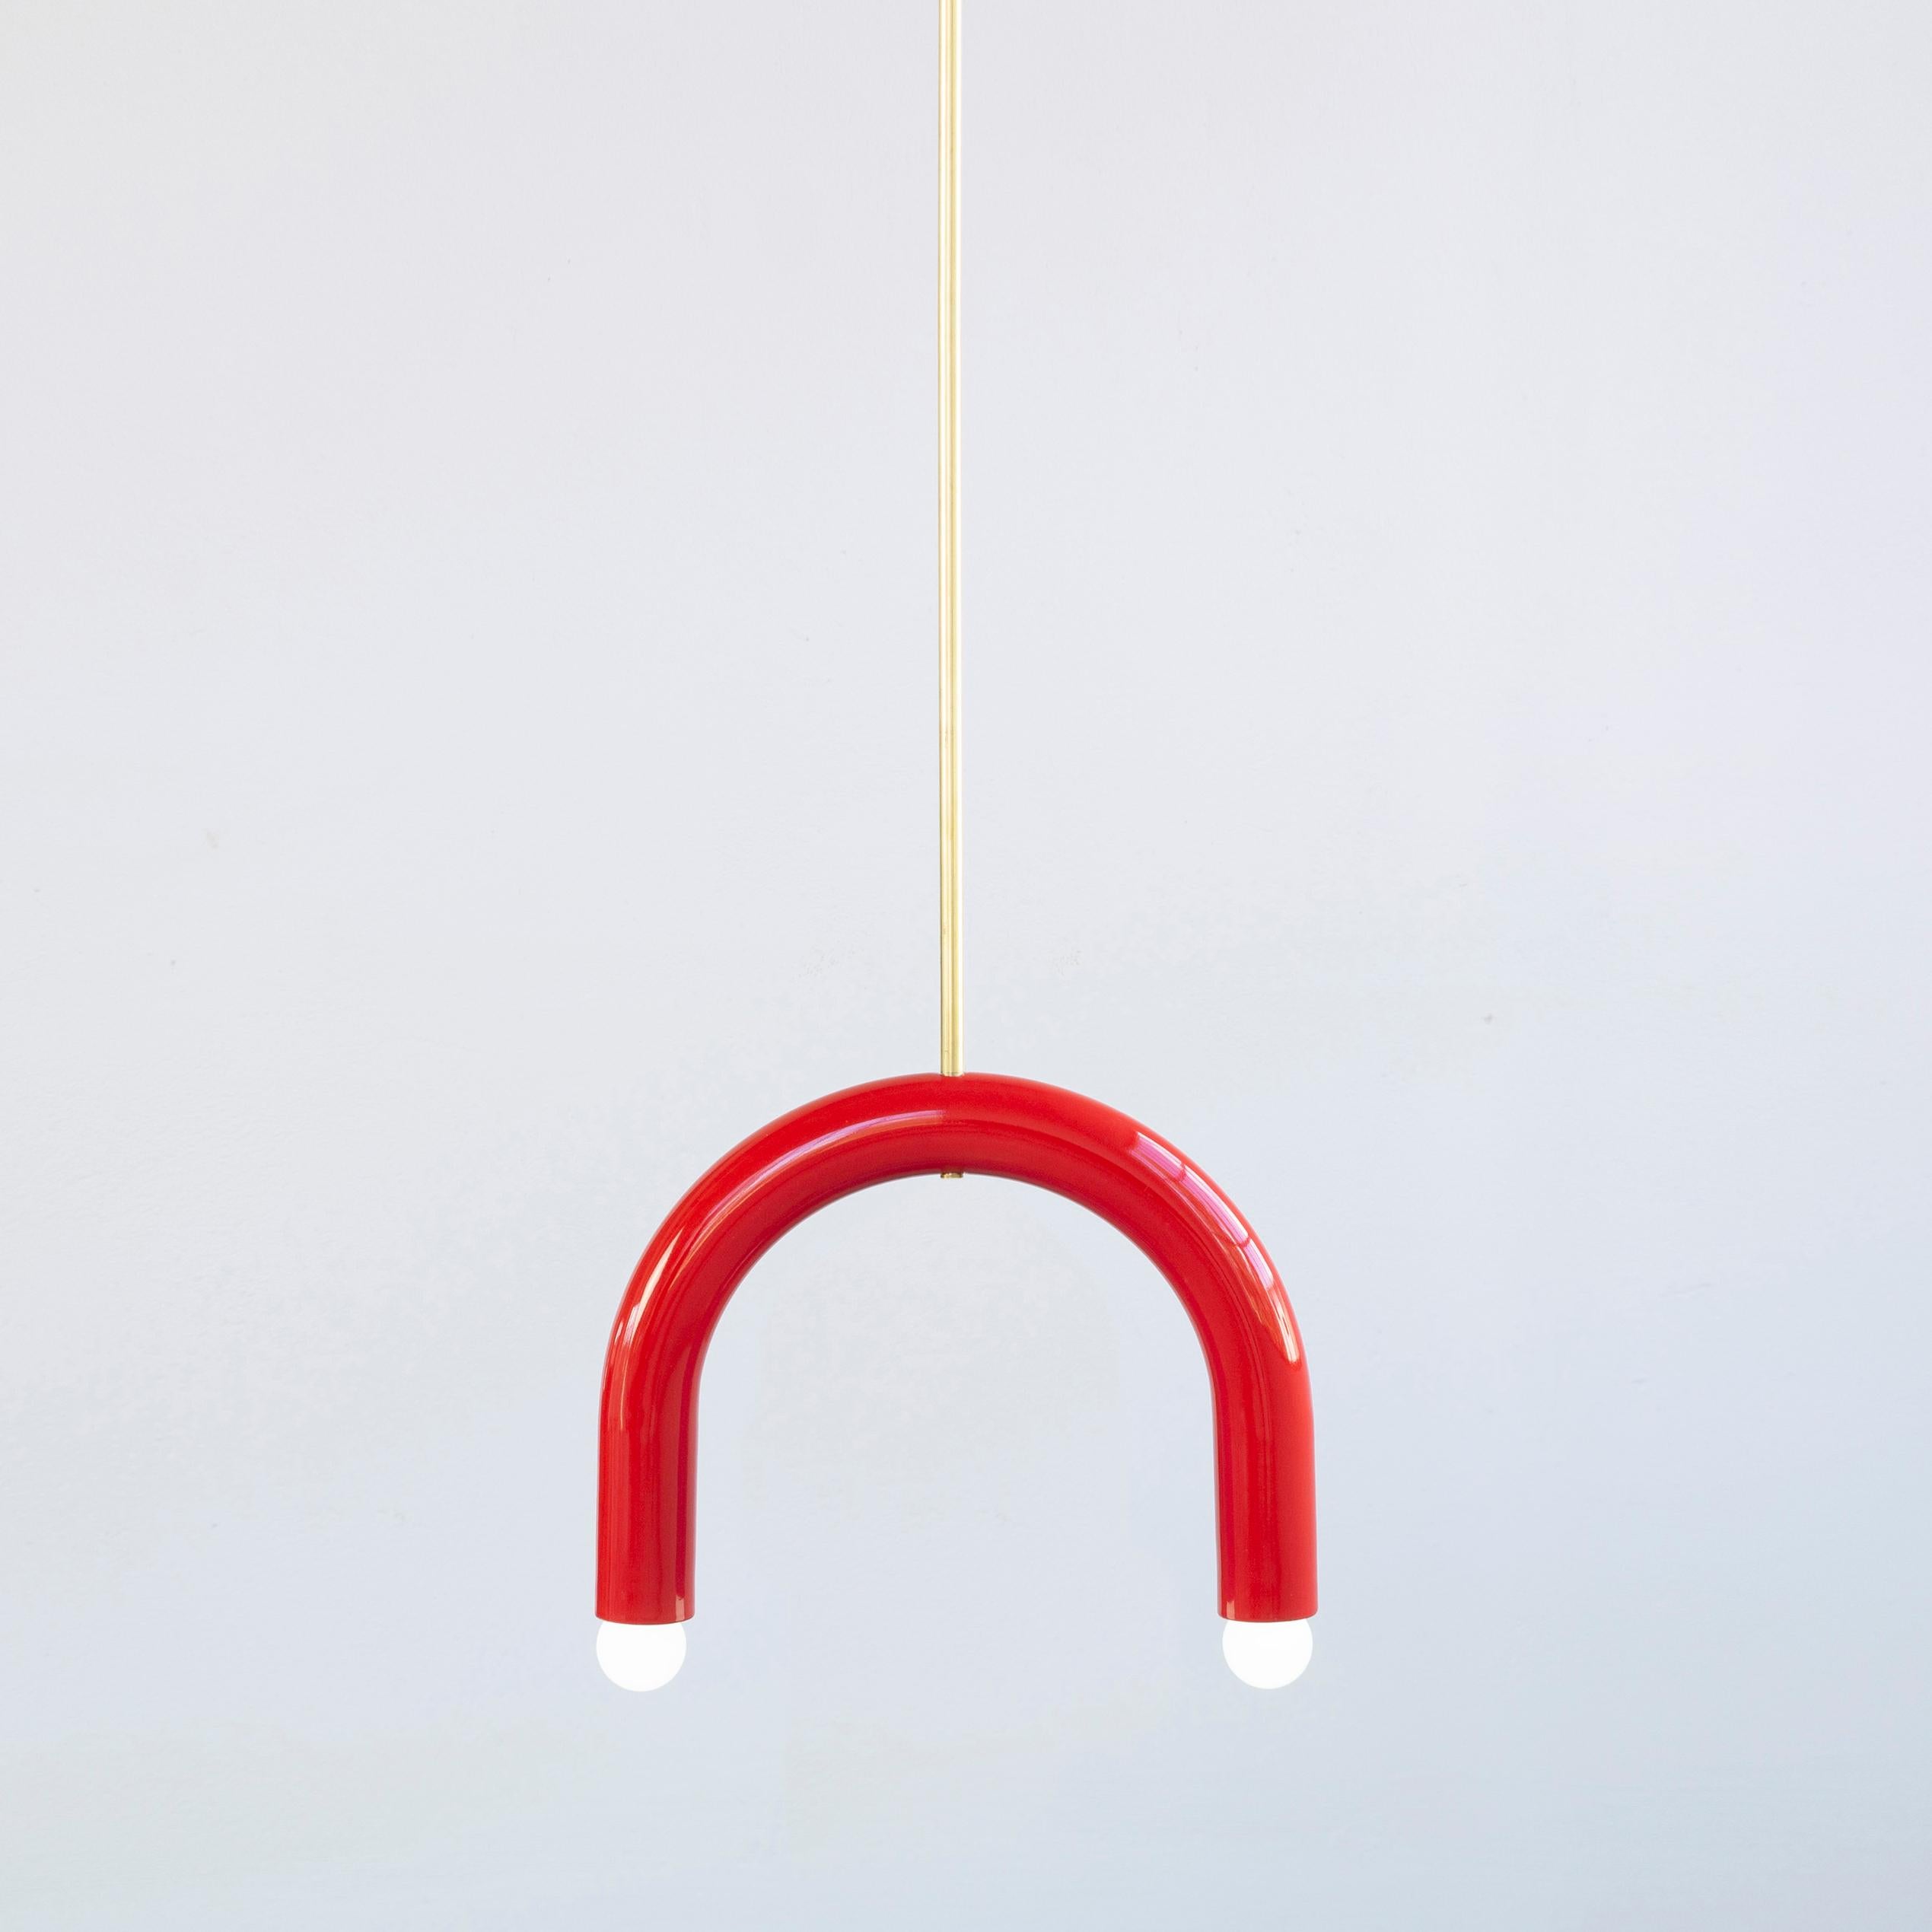 The lighting fixture is part of TRN collection. Three dimensional objects inspired by Tarasin painting have a simple calligraphic form so they can play and talk together as if they were letters from a non-existent alphabet.
 
The hand crafted